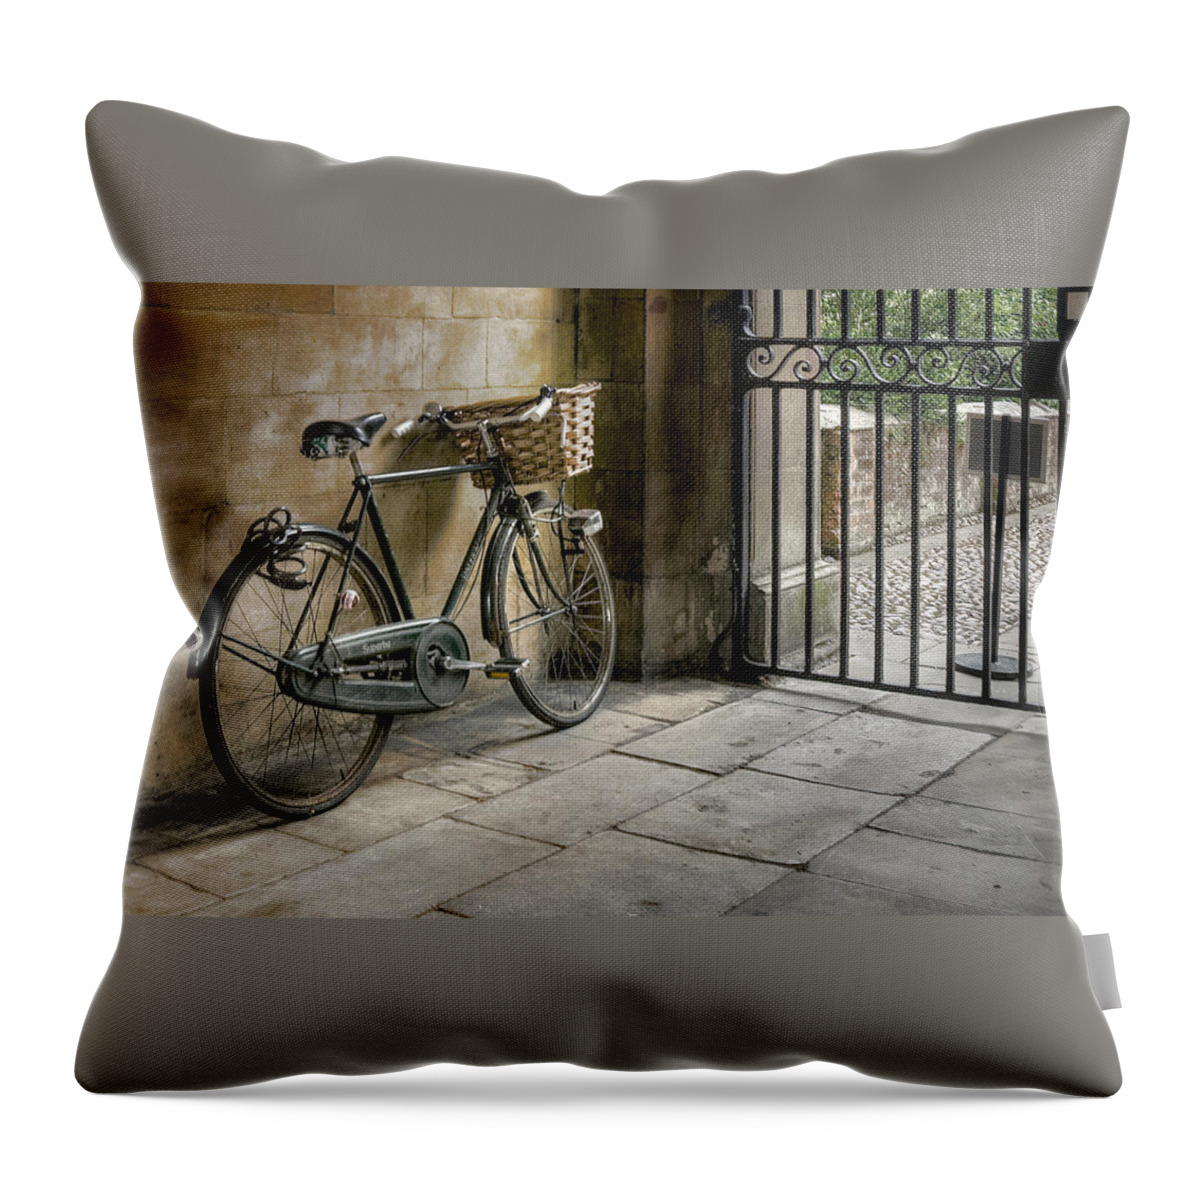 Outdoors Throw Pillow featuring the photograph Cycle With Basket In Front Leaning by Fernan Federici